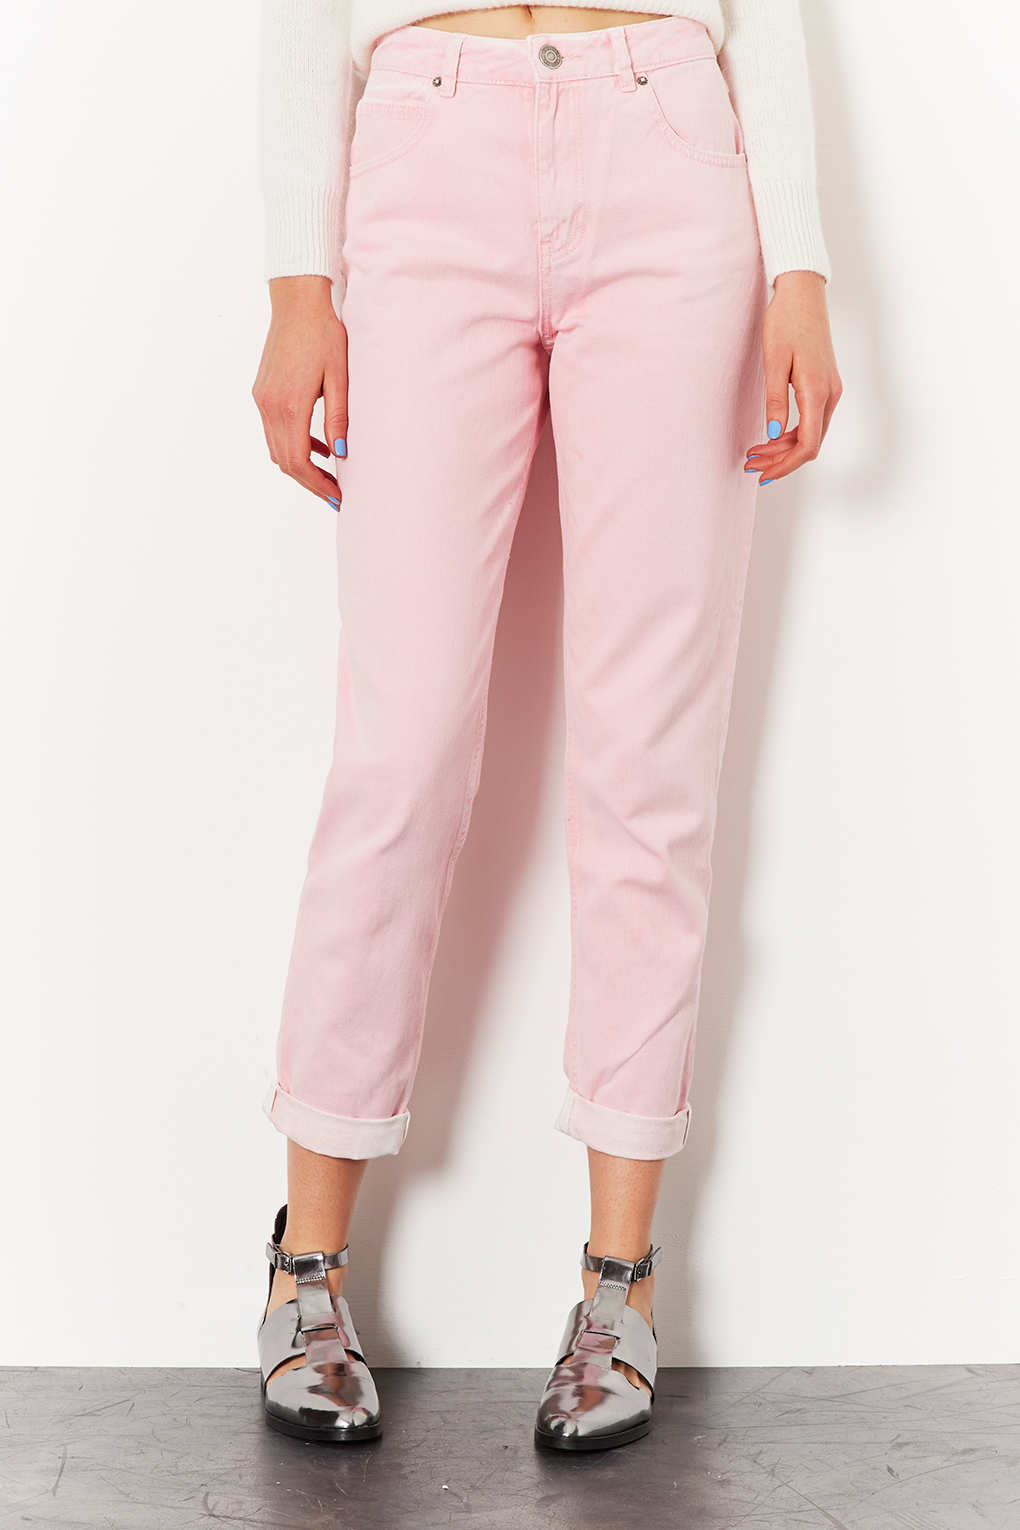 Lyst - Topshop Moto Pink High Waisted Mom Jeans in Pink